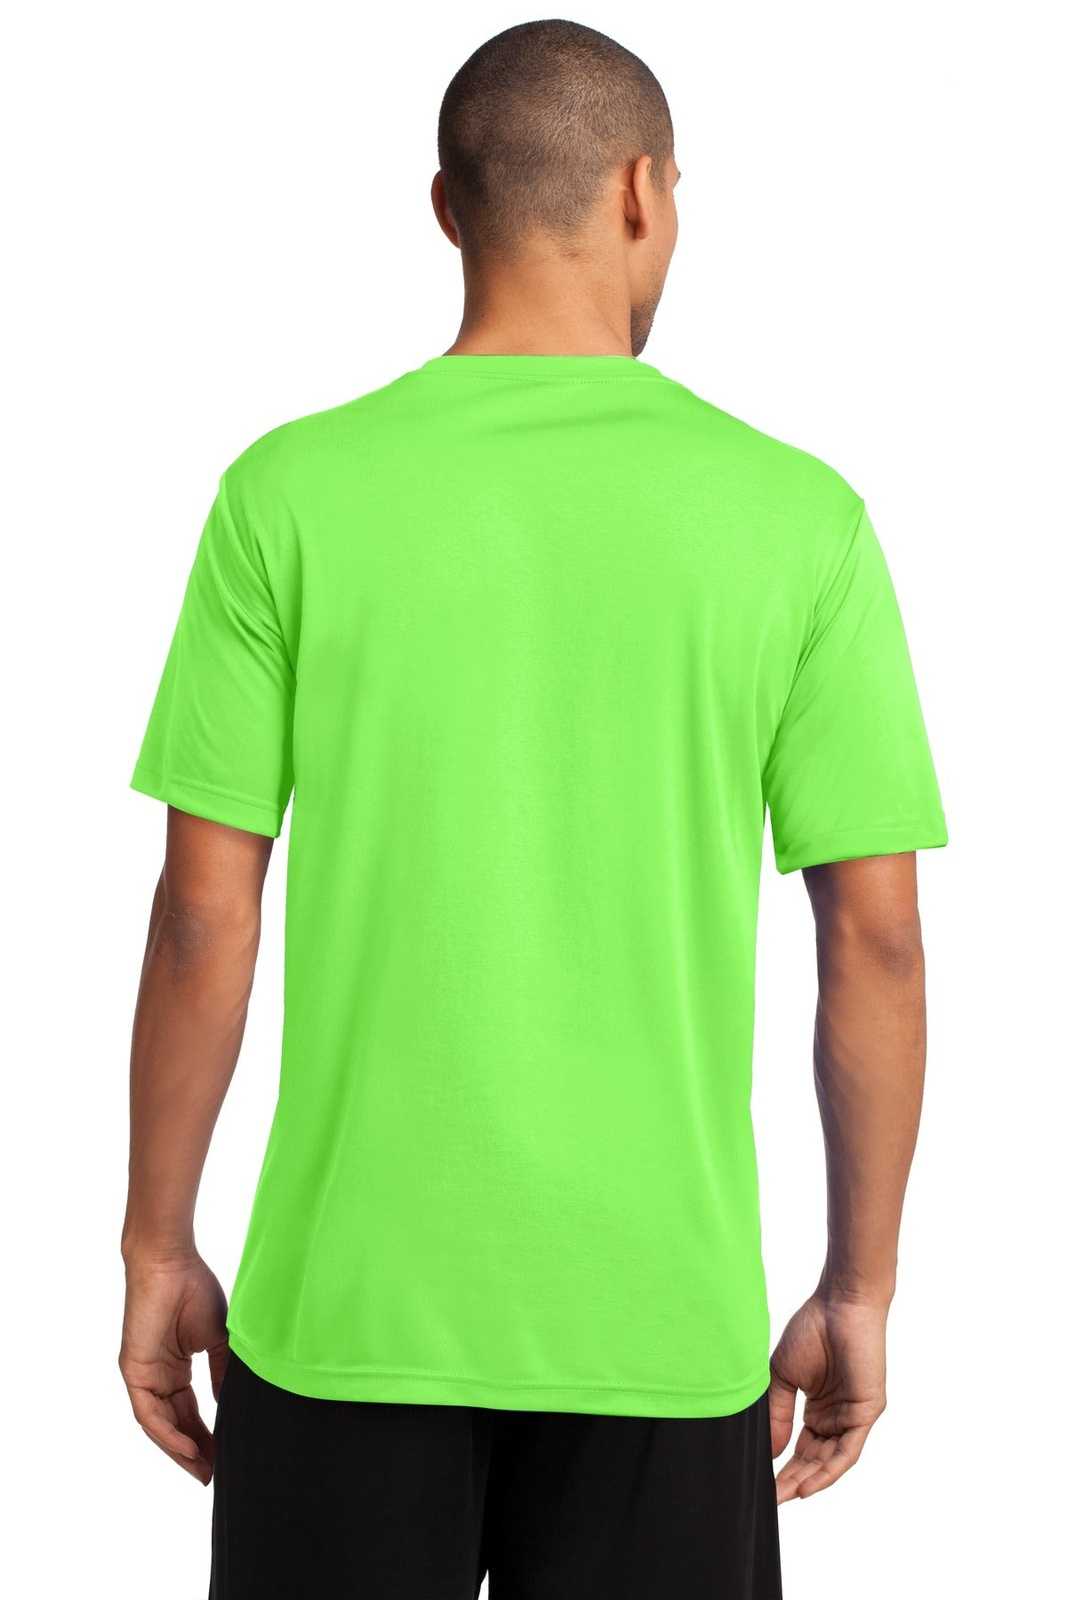 Port & Company PC380 Performance Tee - Neon Green - HIT a Double - 1